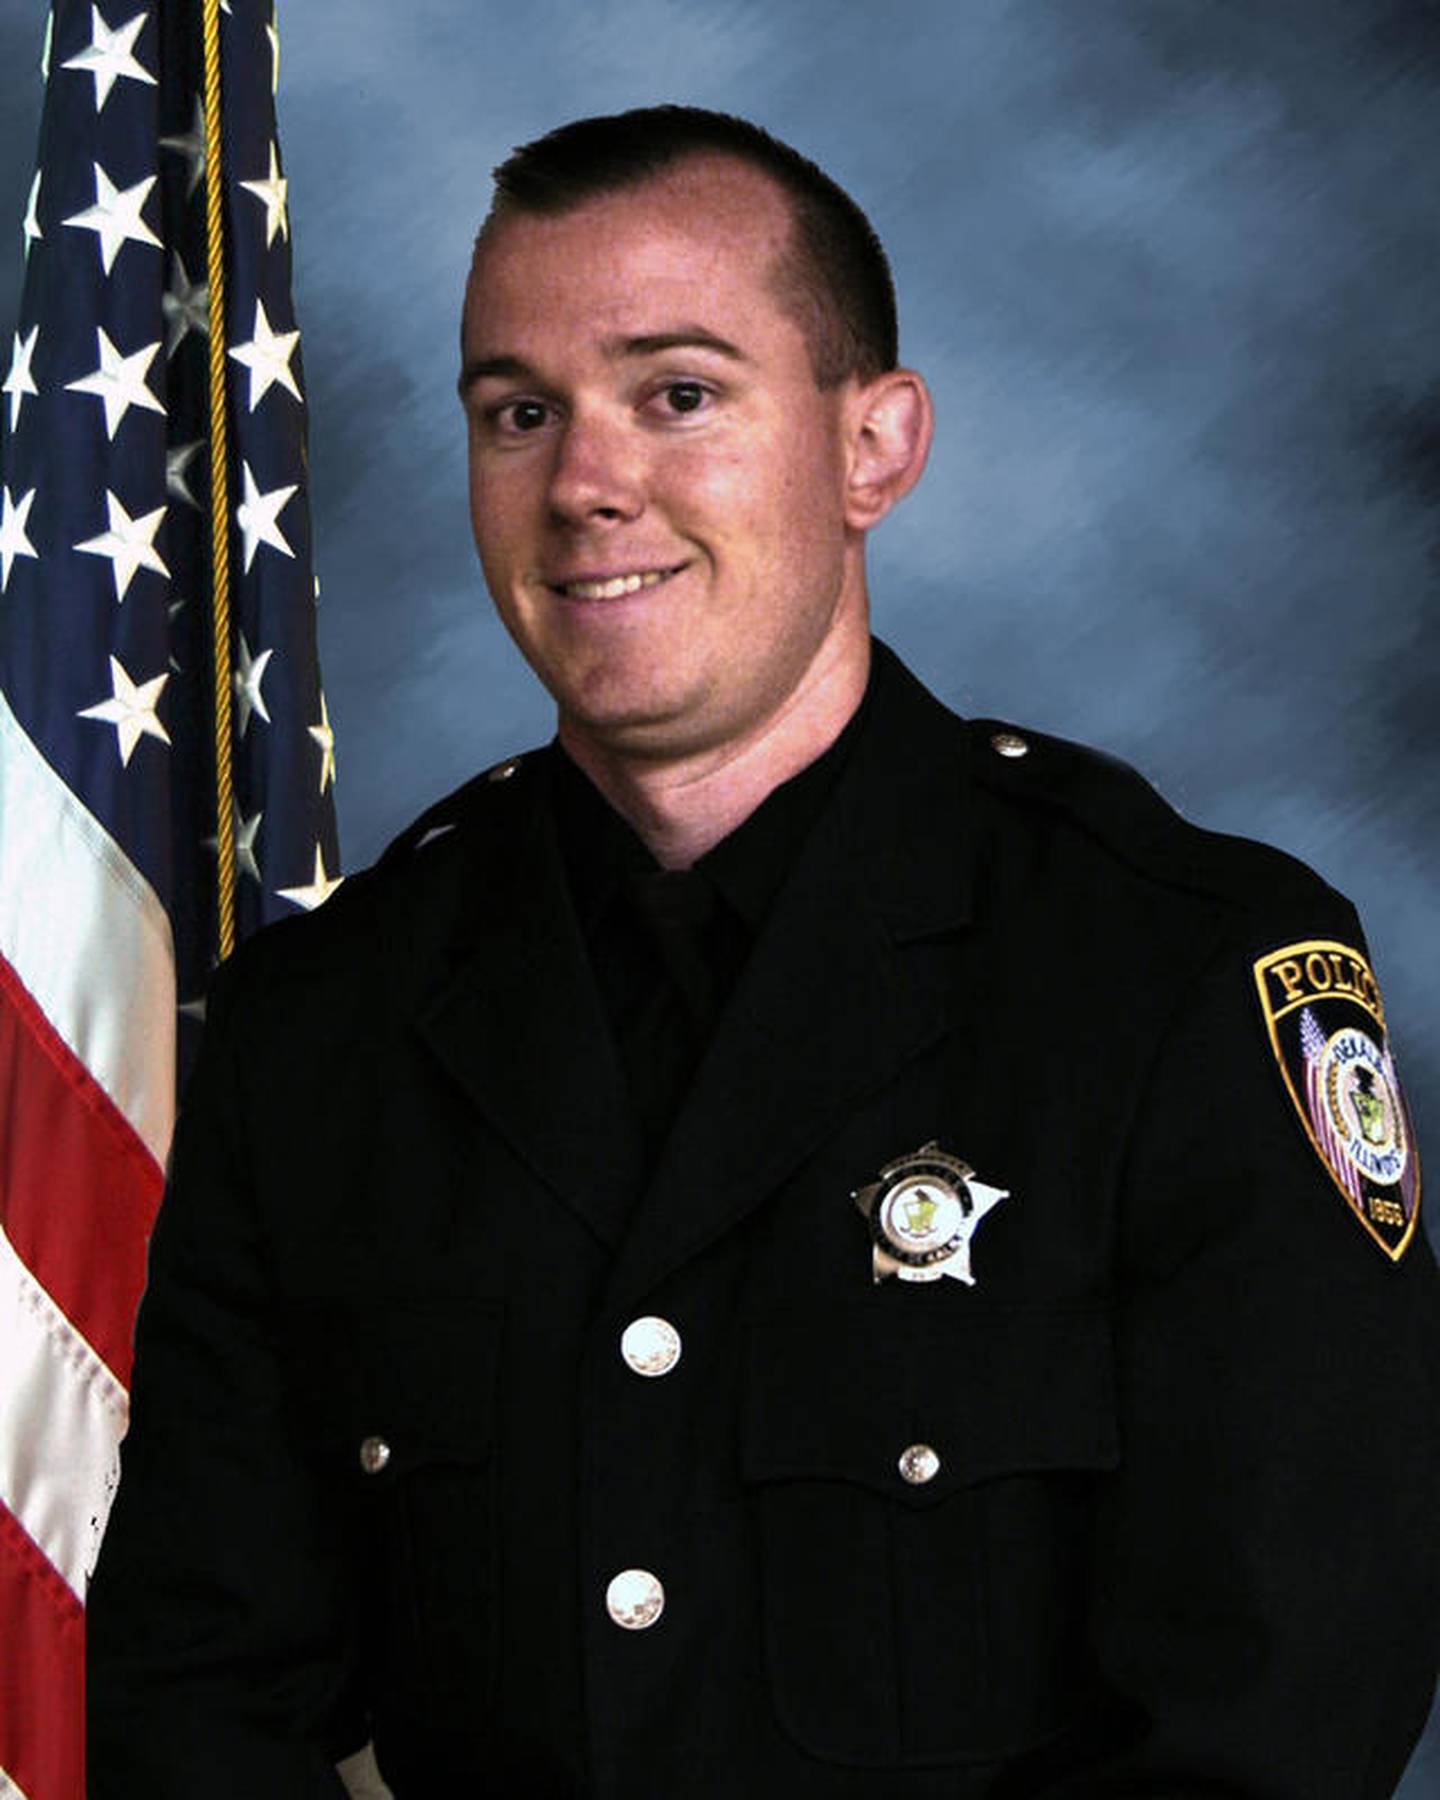 Shaw Local file photo - DeKalb Police Officer Brian Bollow (above) won't face criminal charges or internal discipline after an Oct. 25, 2021 fatal shooting of 33-year-old Kristopher Kramer of DeKalb, who was killed when police responded to a domestic incident last fall. Kramer brandished a three-foot sword at police and refused instructions to comply with officer peacefully.